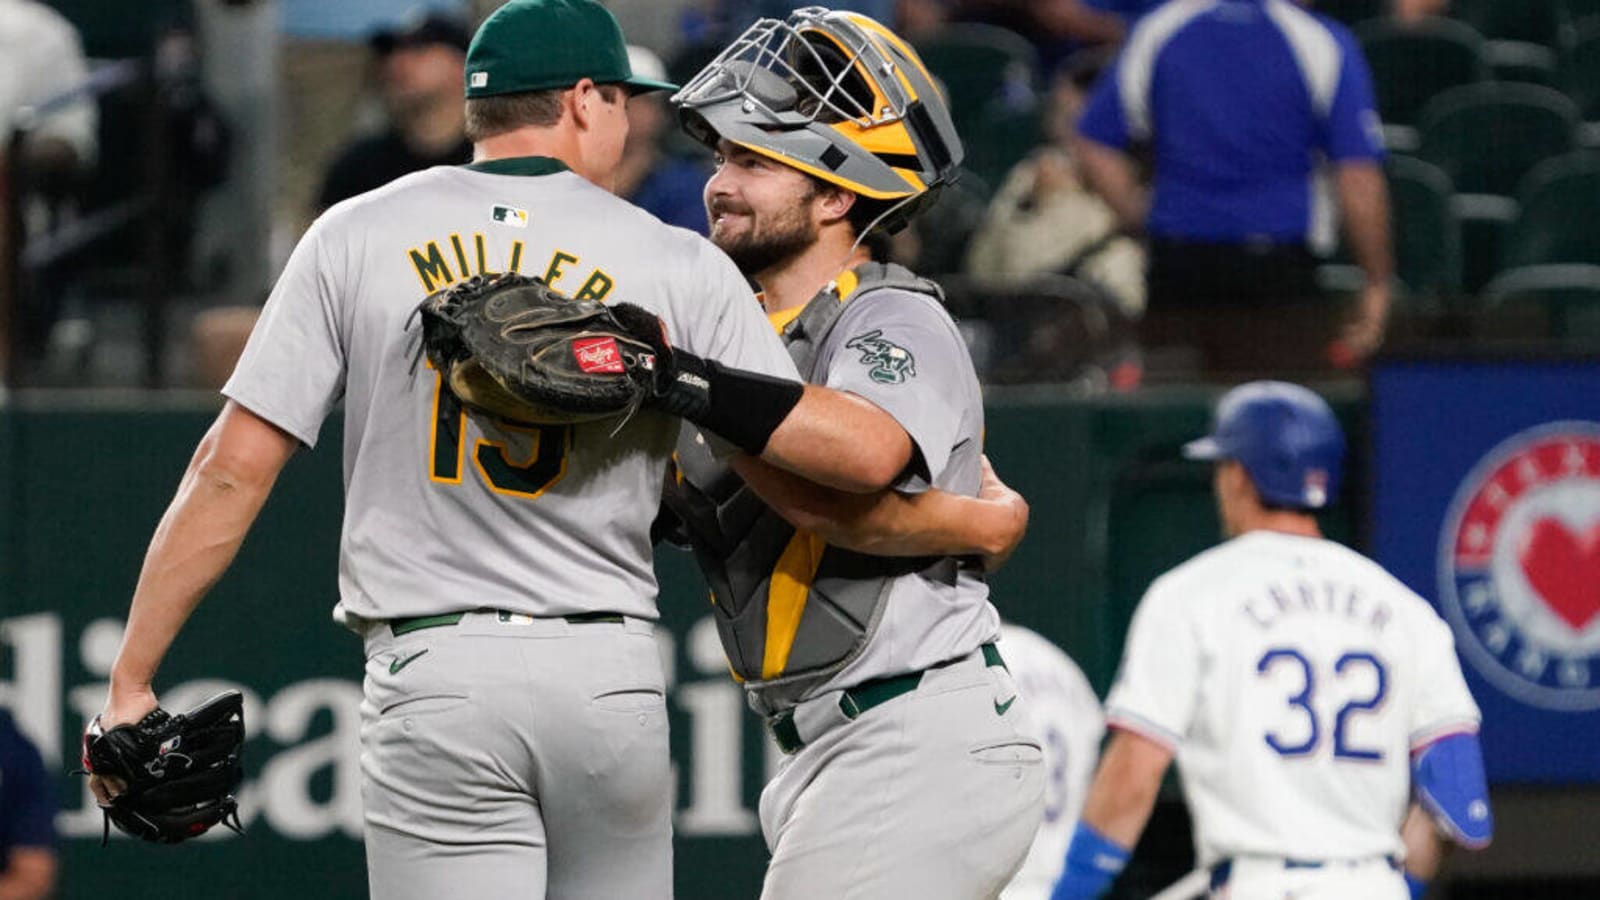 The Dominance Of This Oakland Athletics Flamethrower